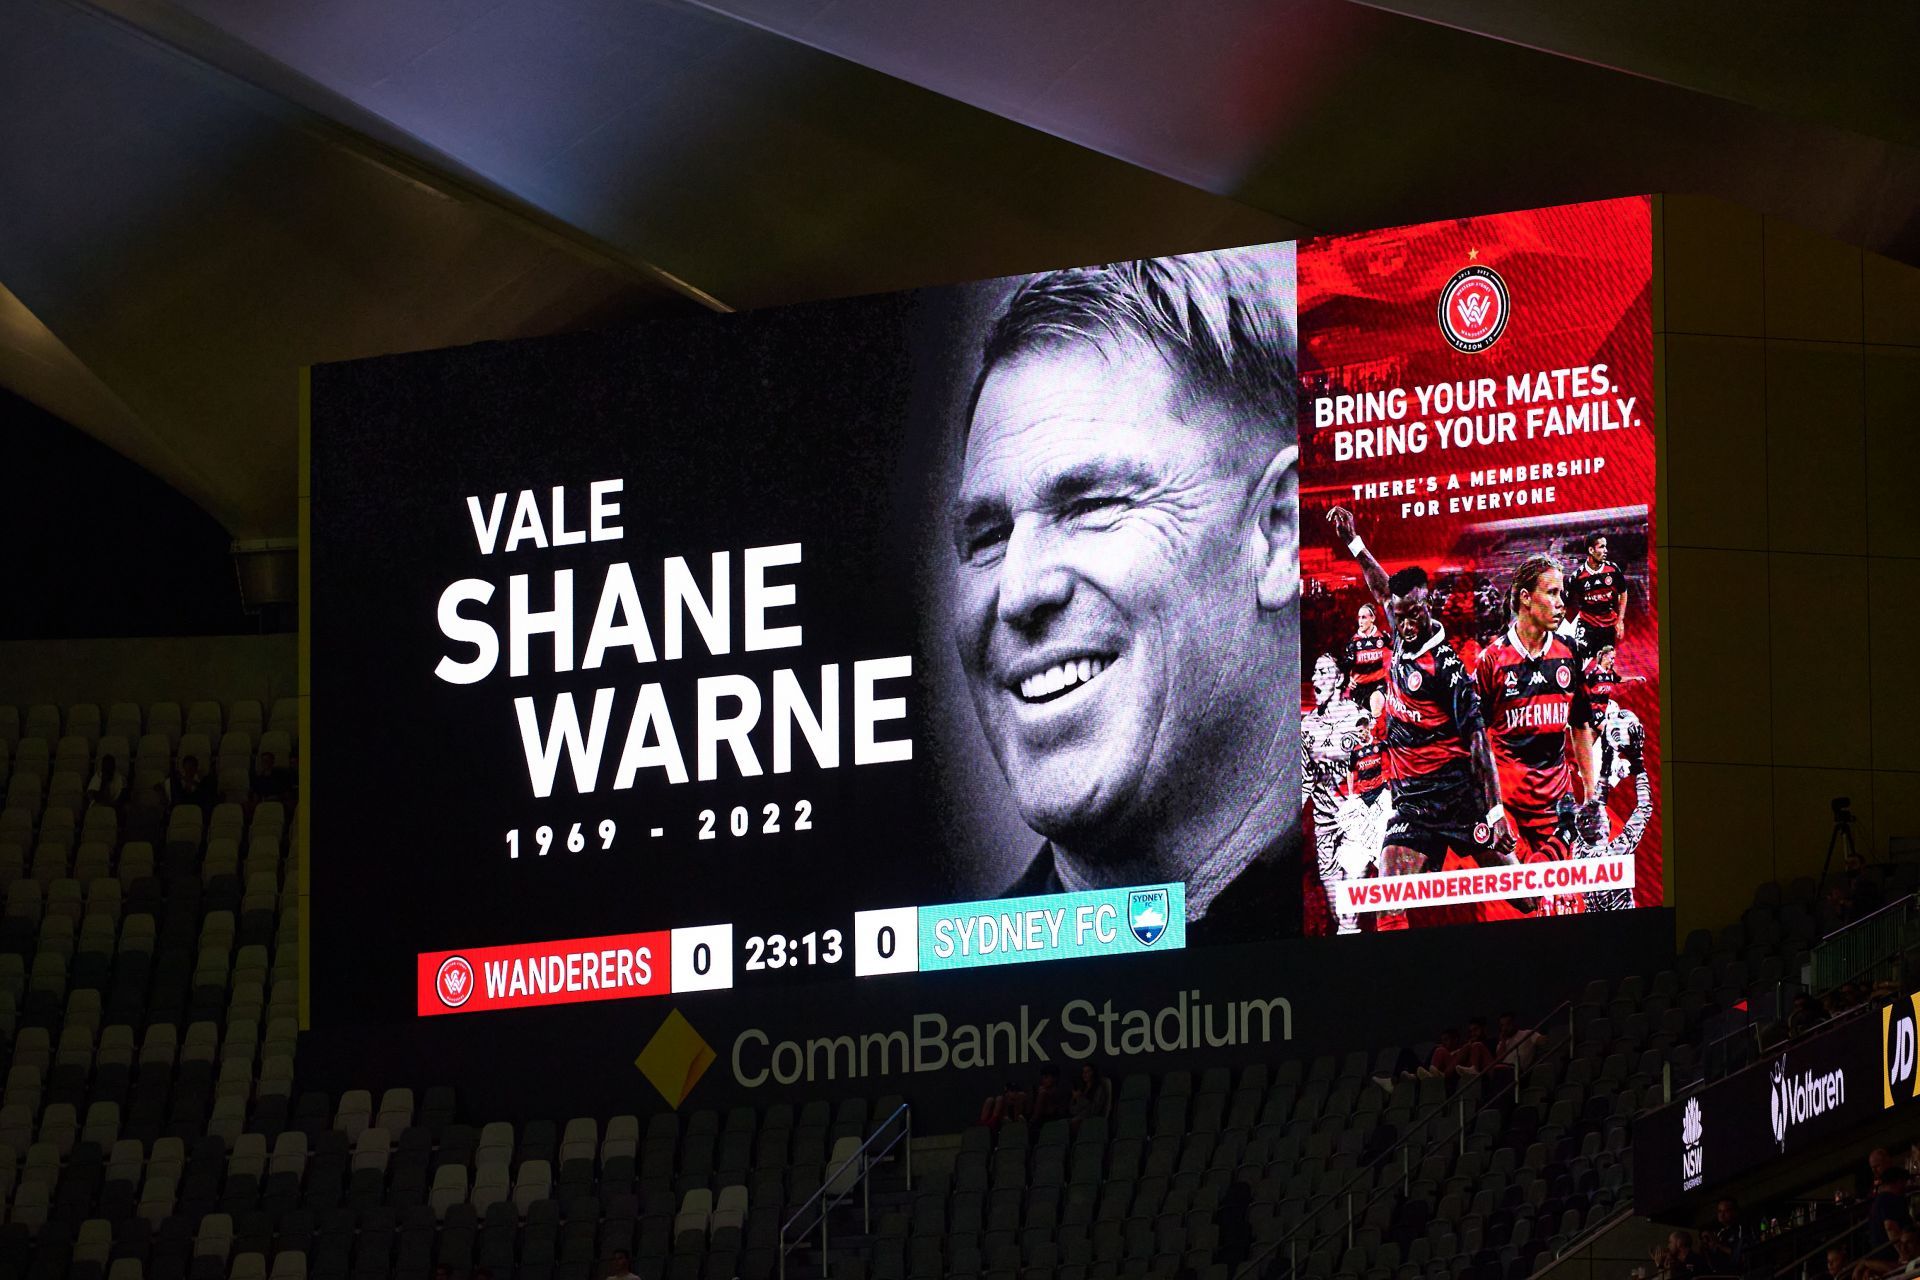 Tribute being paid to Shane Warne at a stadium after his sudden passing away